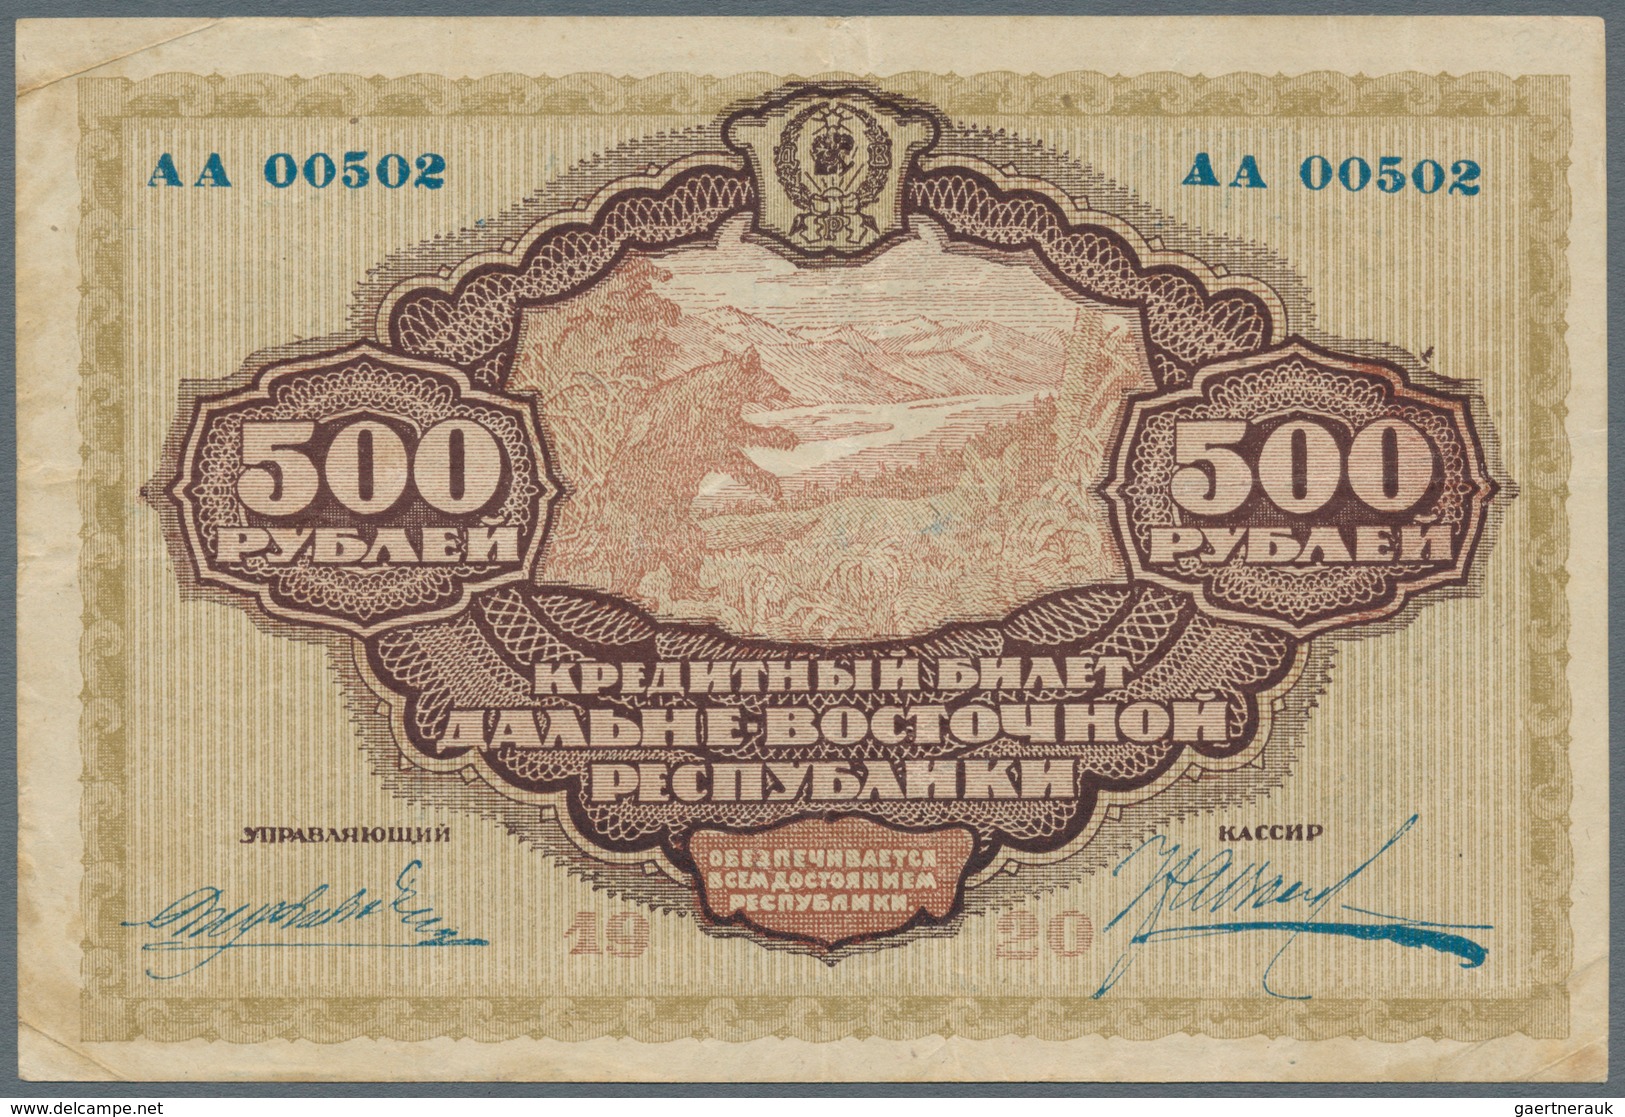 Russia / Russland: East Siberia and Far Eastern Republic set with 5 Banknotes containing 500 and 100